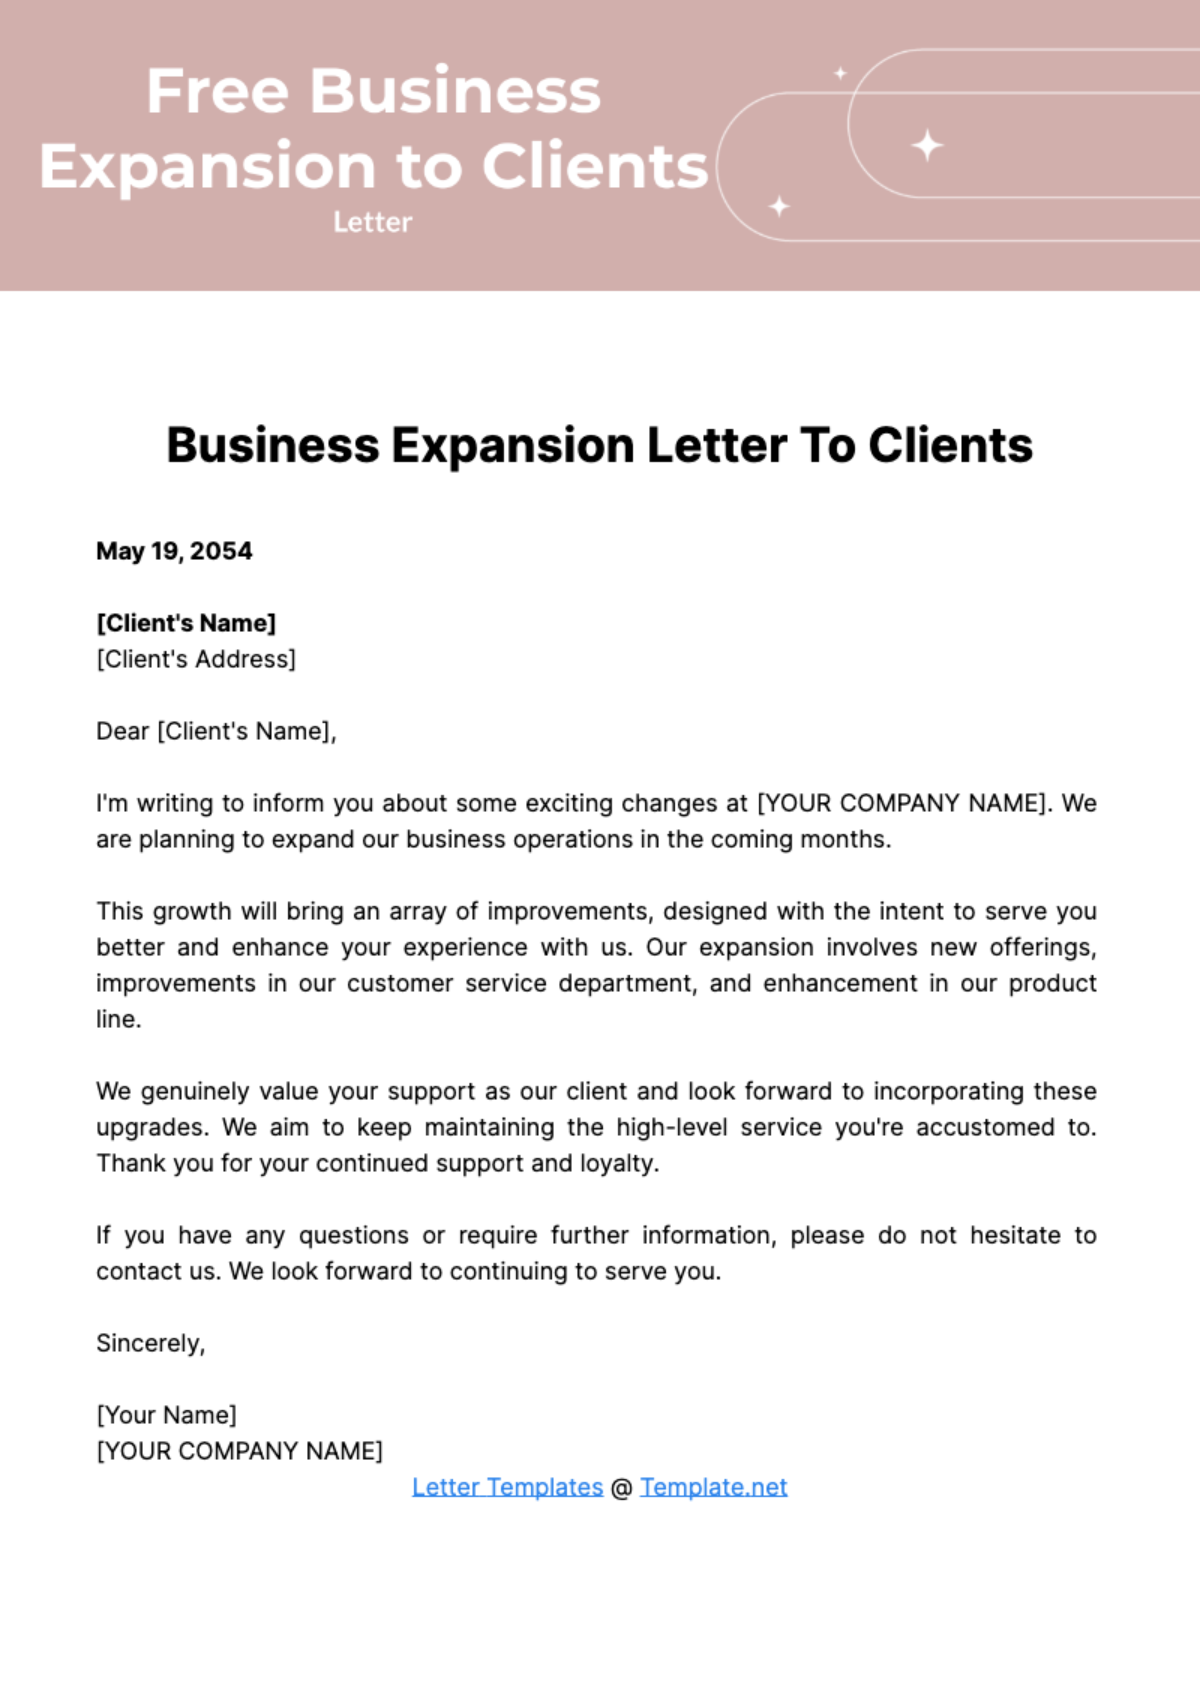 Free Business Expansion Letter to Clients Template